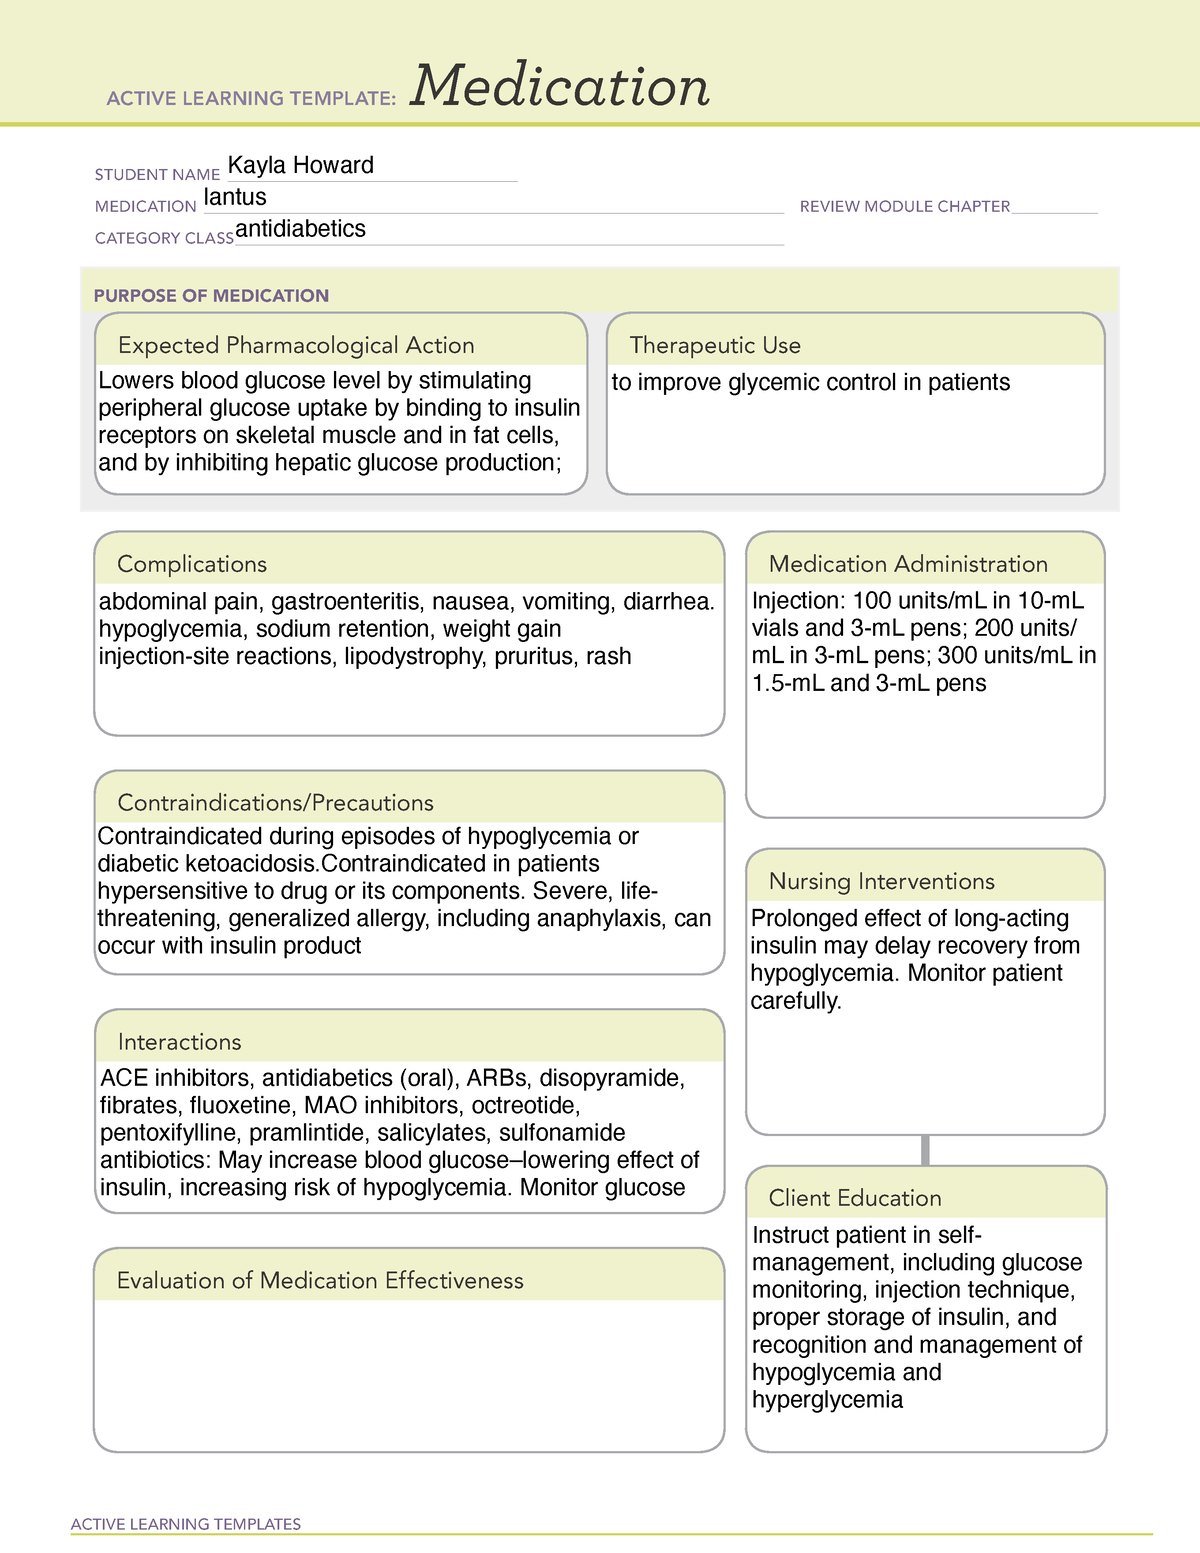 Lantus med sheets ACTIVE LEARNING TEMPLATES Medication STUDENT NAME